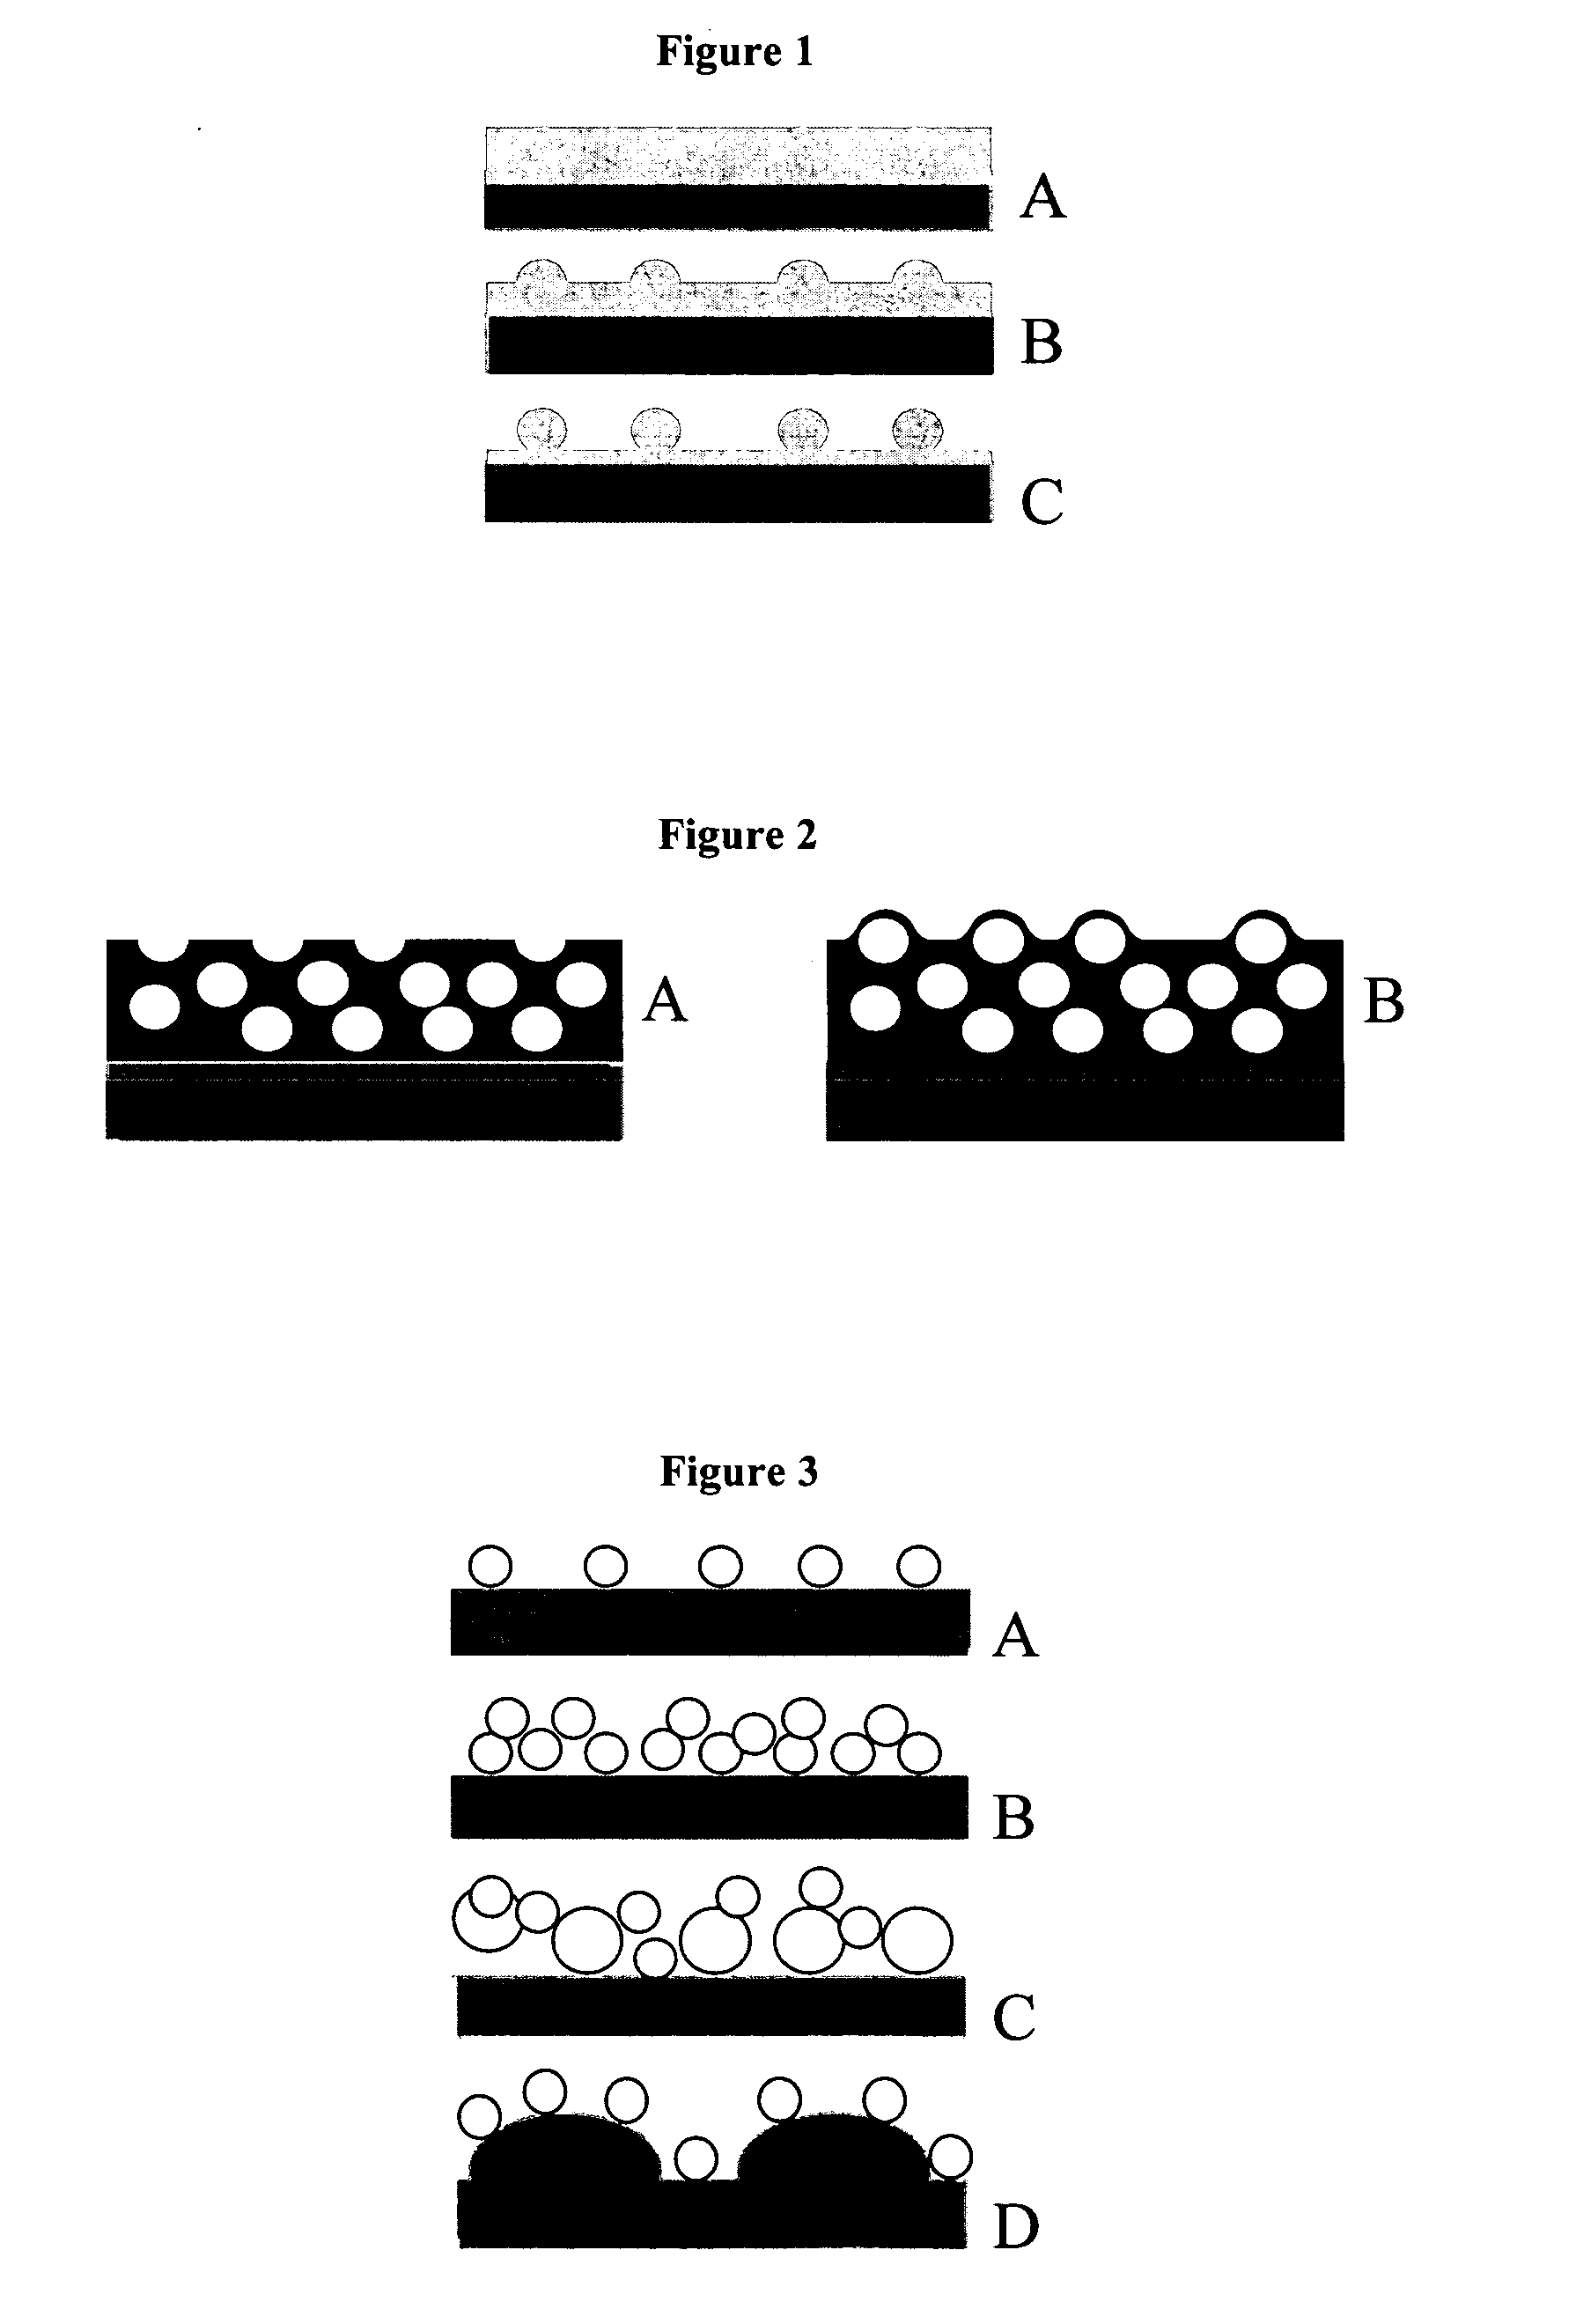 Article coated with an ultra high hydrophobic film and process for obtaining same